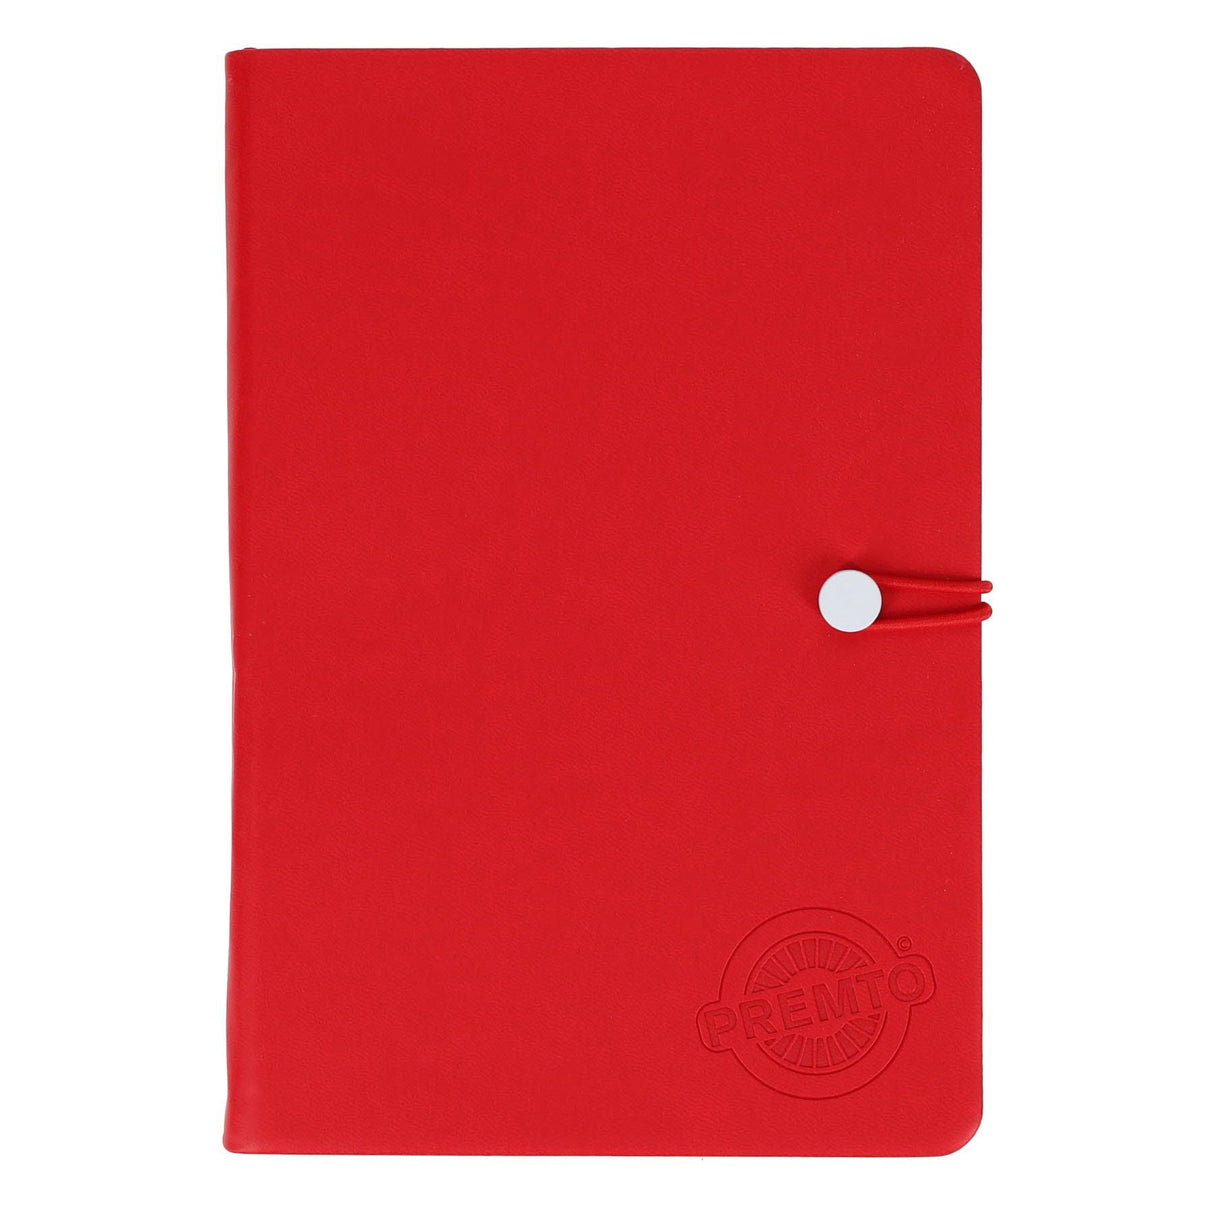 Premto A5 PU Leather Hardcover Notebook with Elastic Closure - 192 Pages - Ketchup Red-A5 Notebooks-Premto|StationeryShop.co.uk